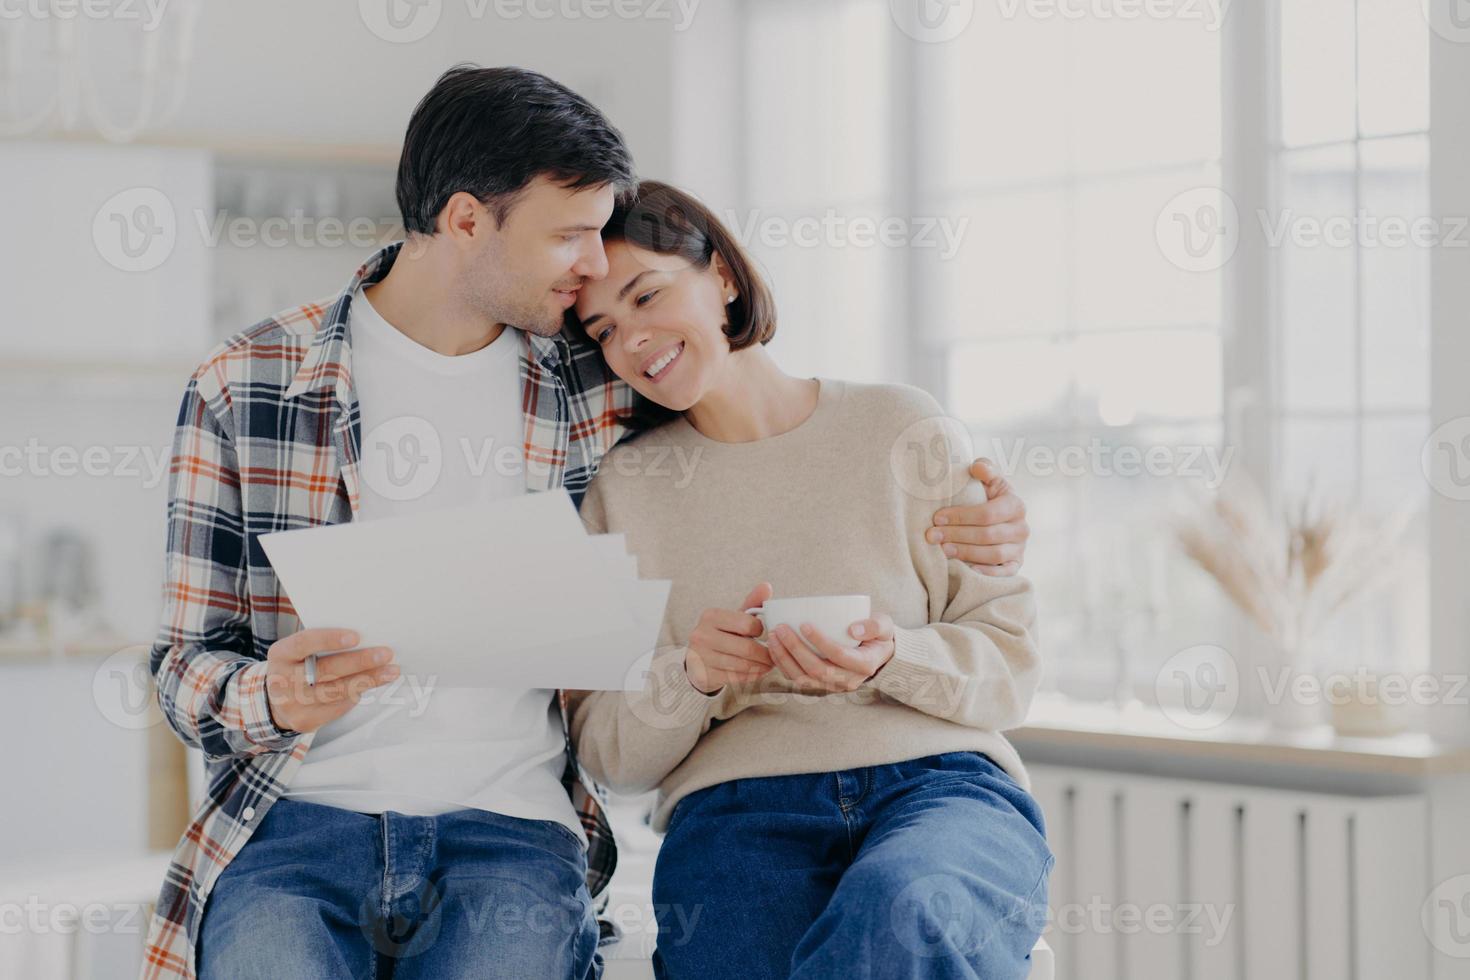 Caring husband embraces wife with love, have glad expressions, holds paper documents, discuss banking procedures, study bills, drink tea or coffee, pose indoor, enjoy calm domestic atmosphere photo